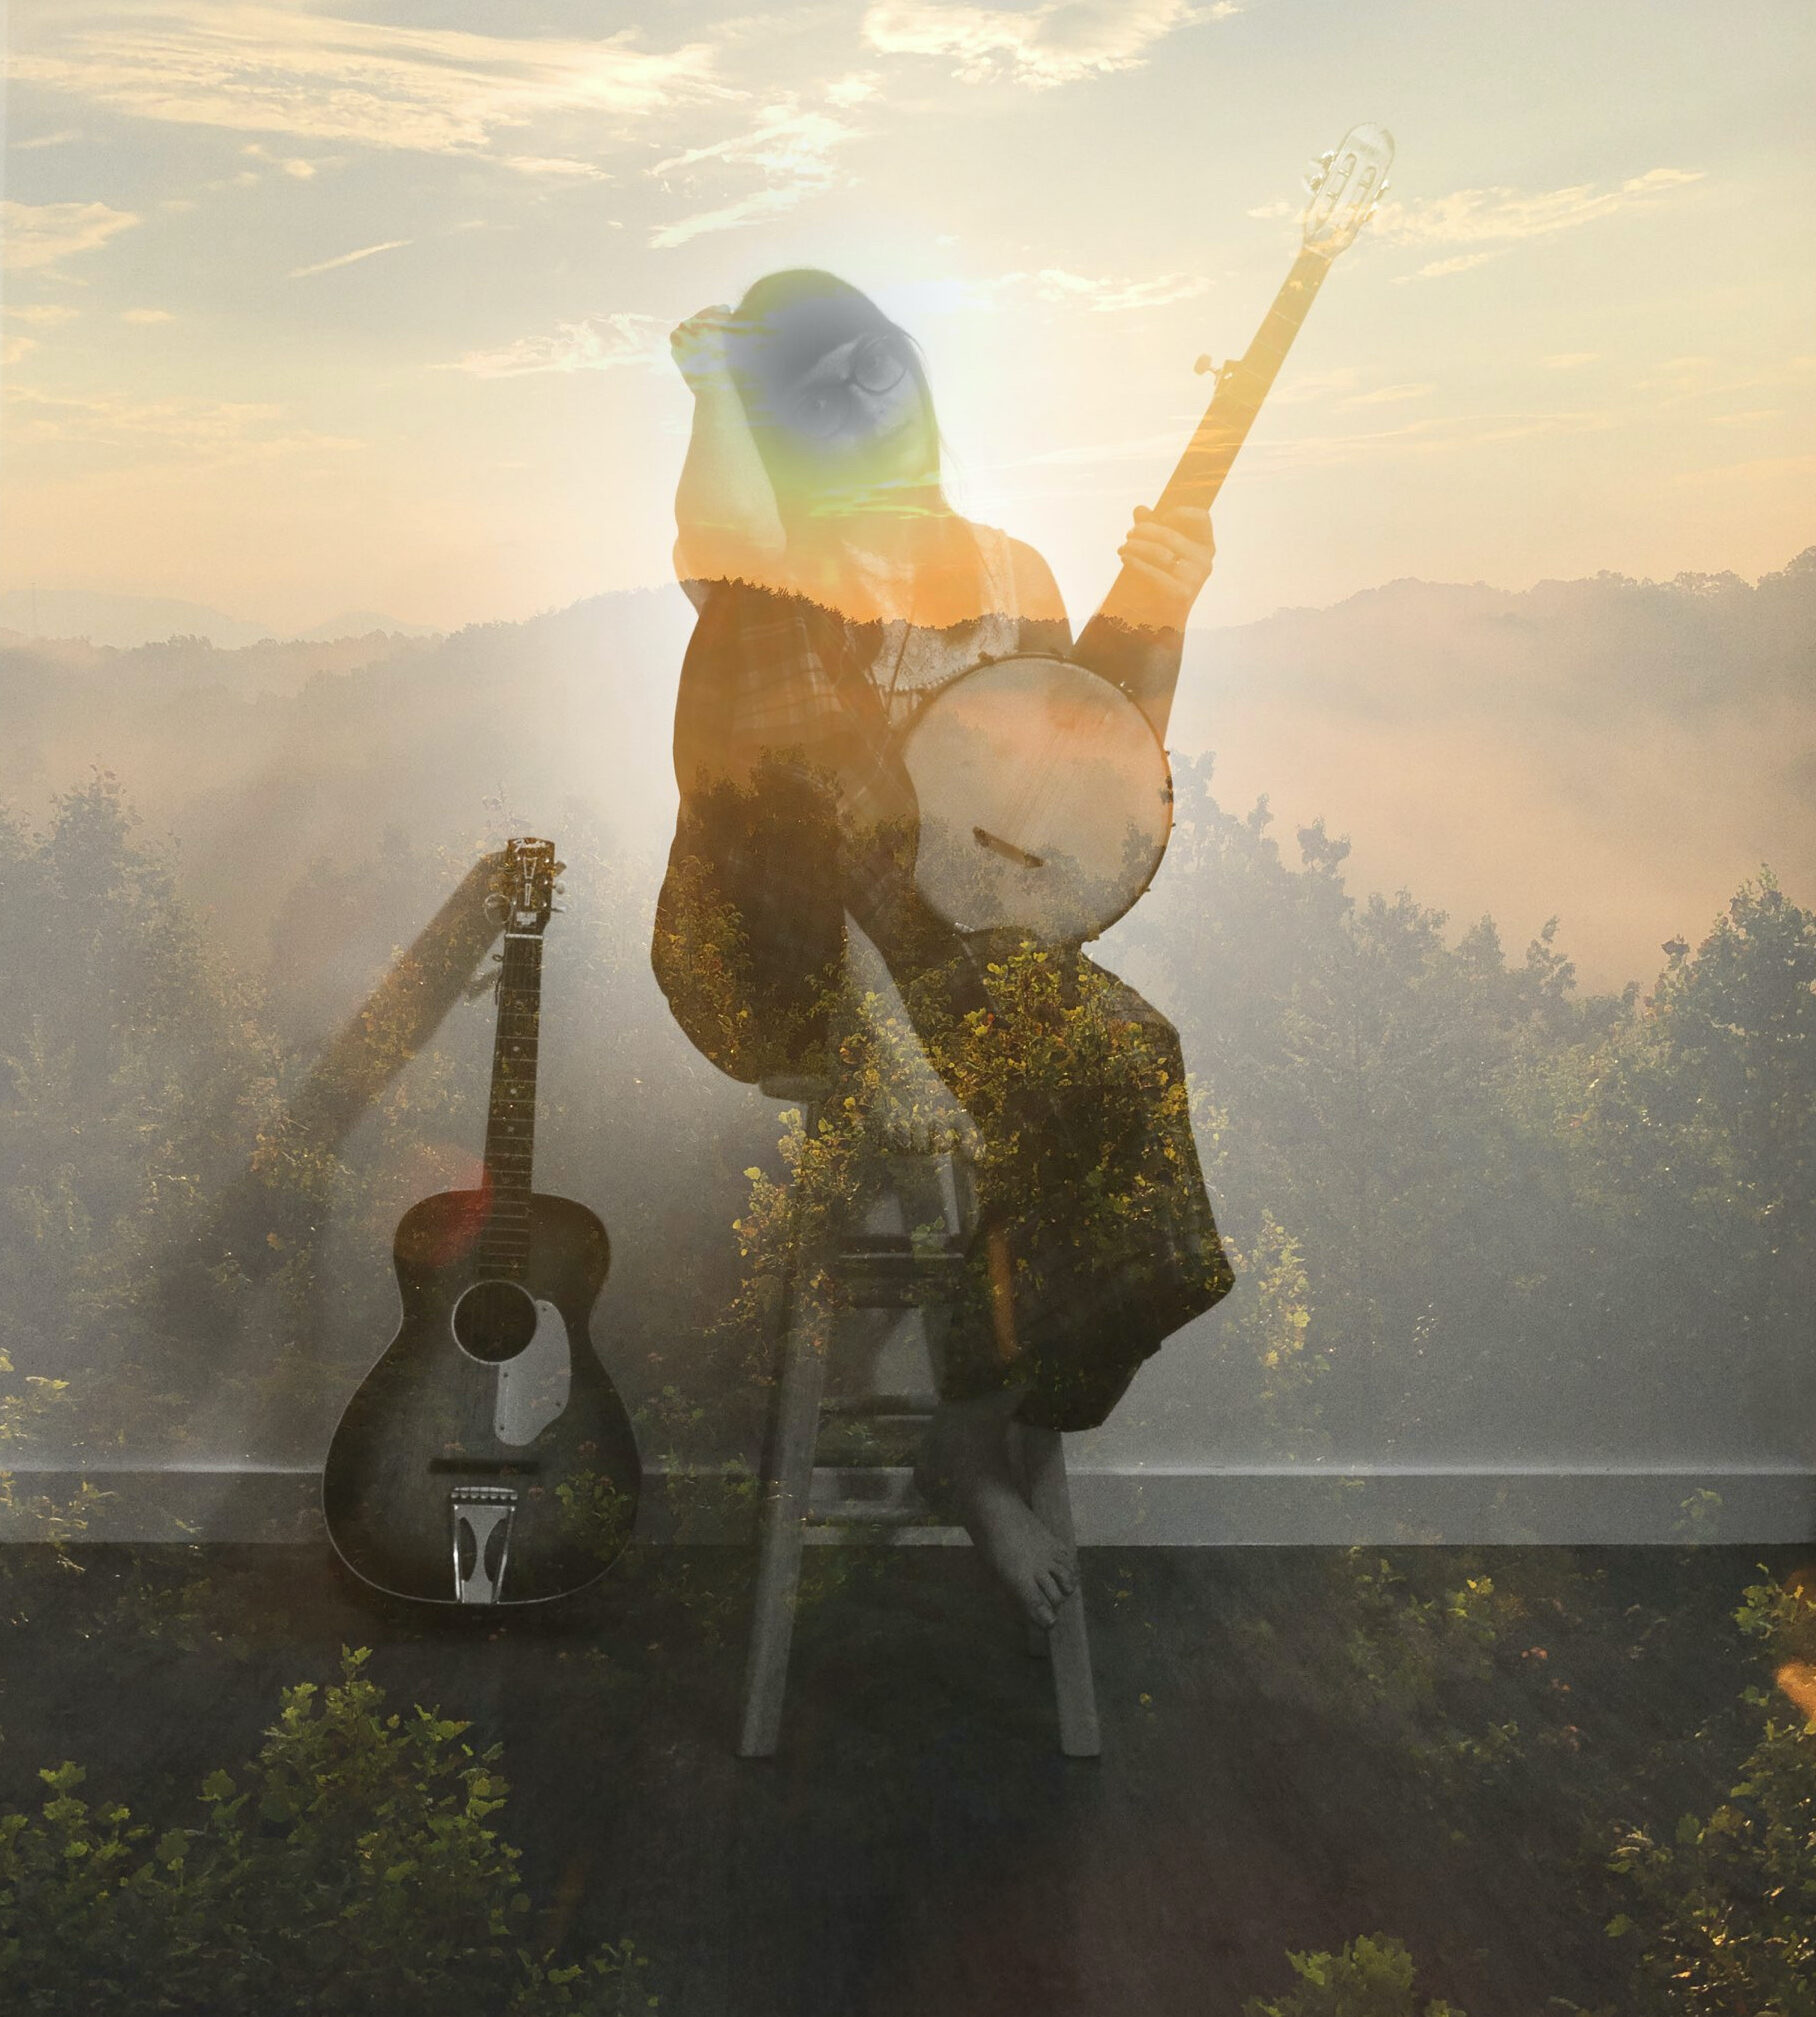 image shows lauren's album cover art, which is a double-exposure image of her sitting on a stool holding a banjo, overlaid with a mountain sunrise that gives the image a golden, sunny quality